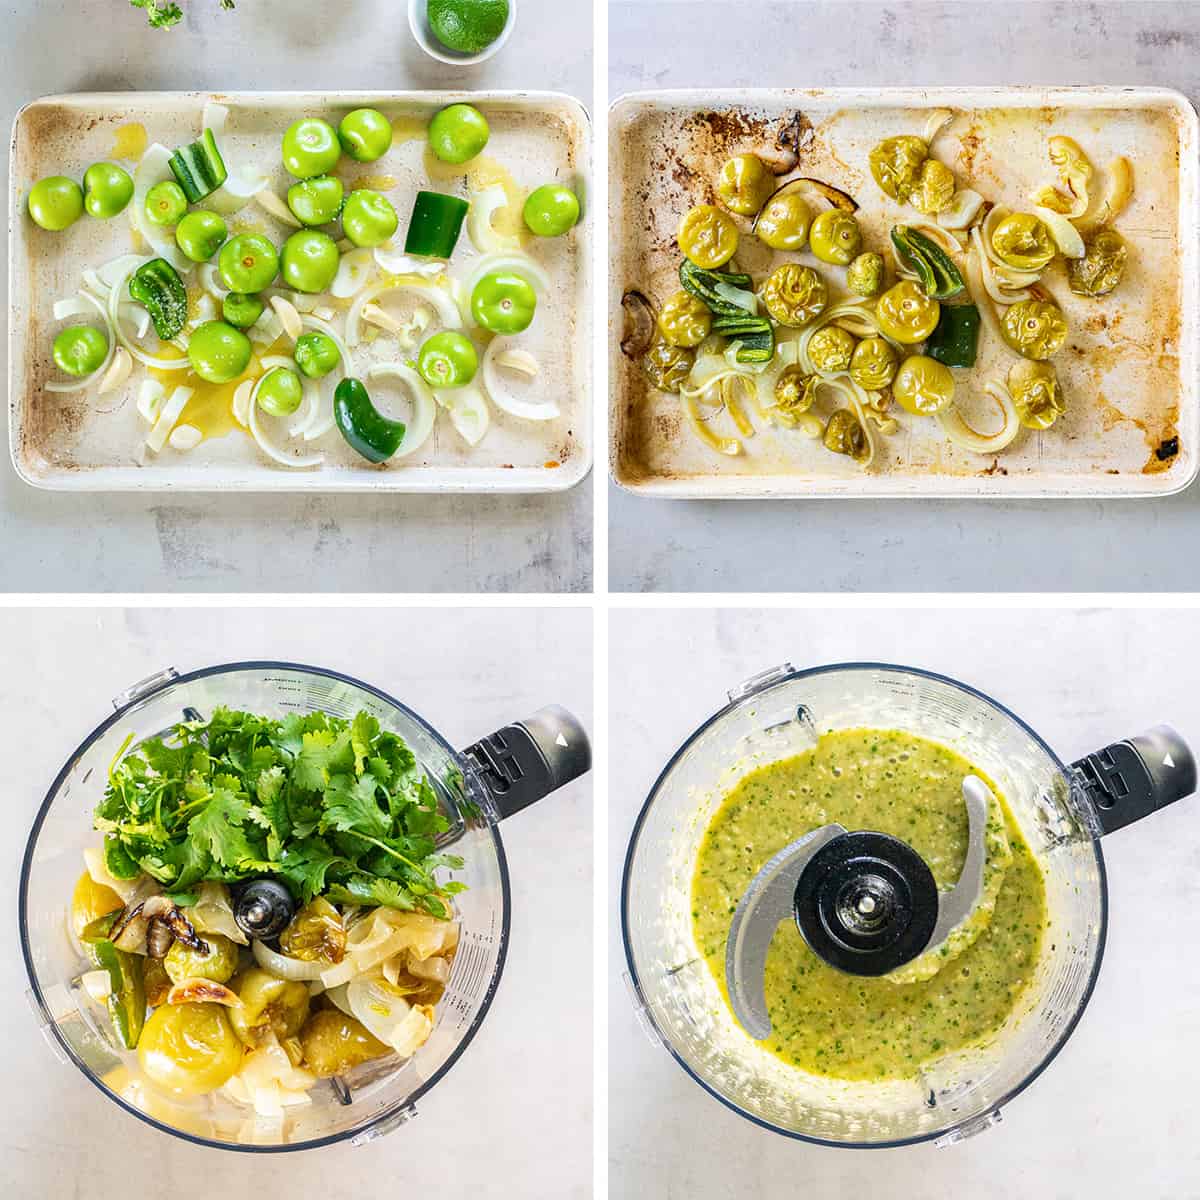 Four images of roasted tomatillos, onion, and jalapeno on a baking sheet and in a food processor.